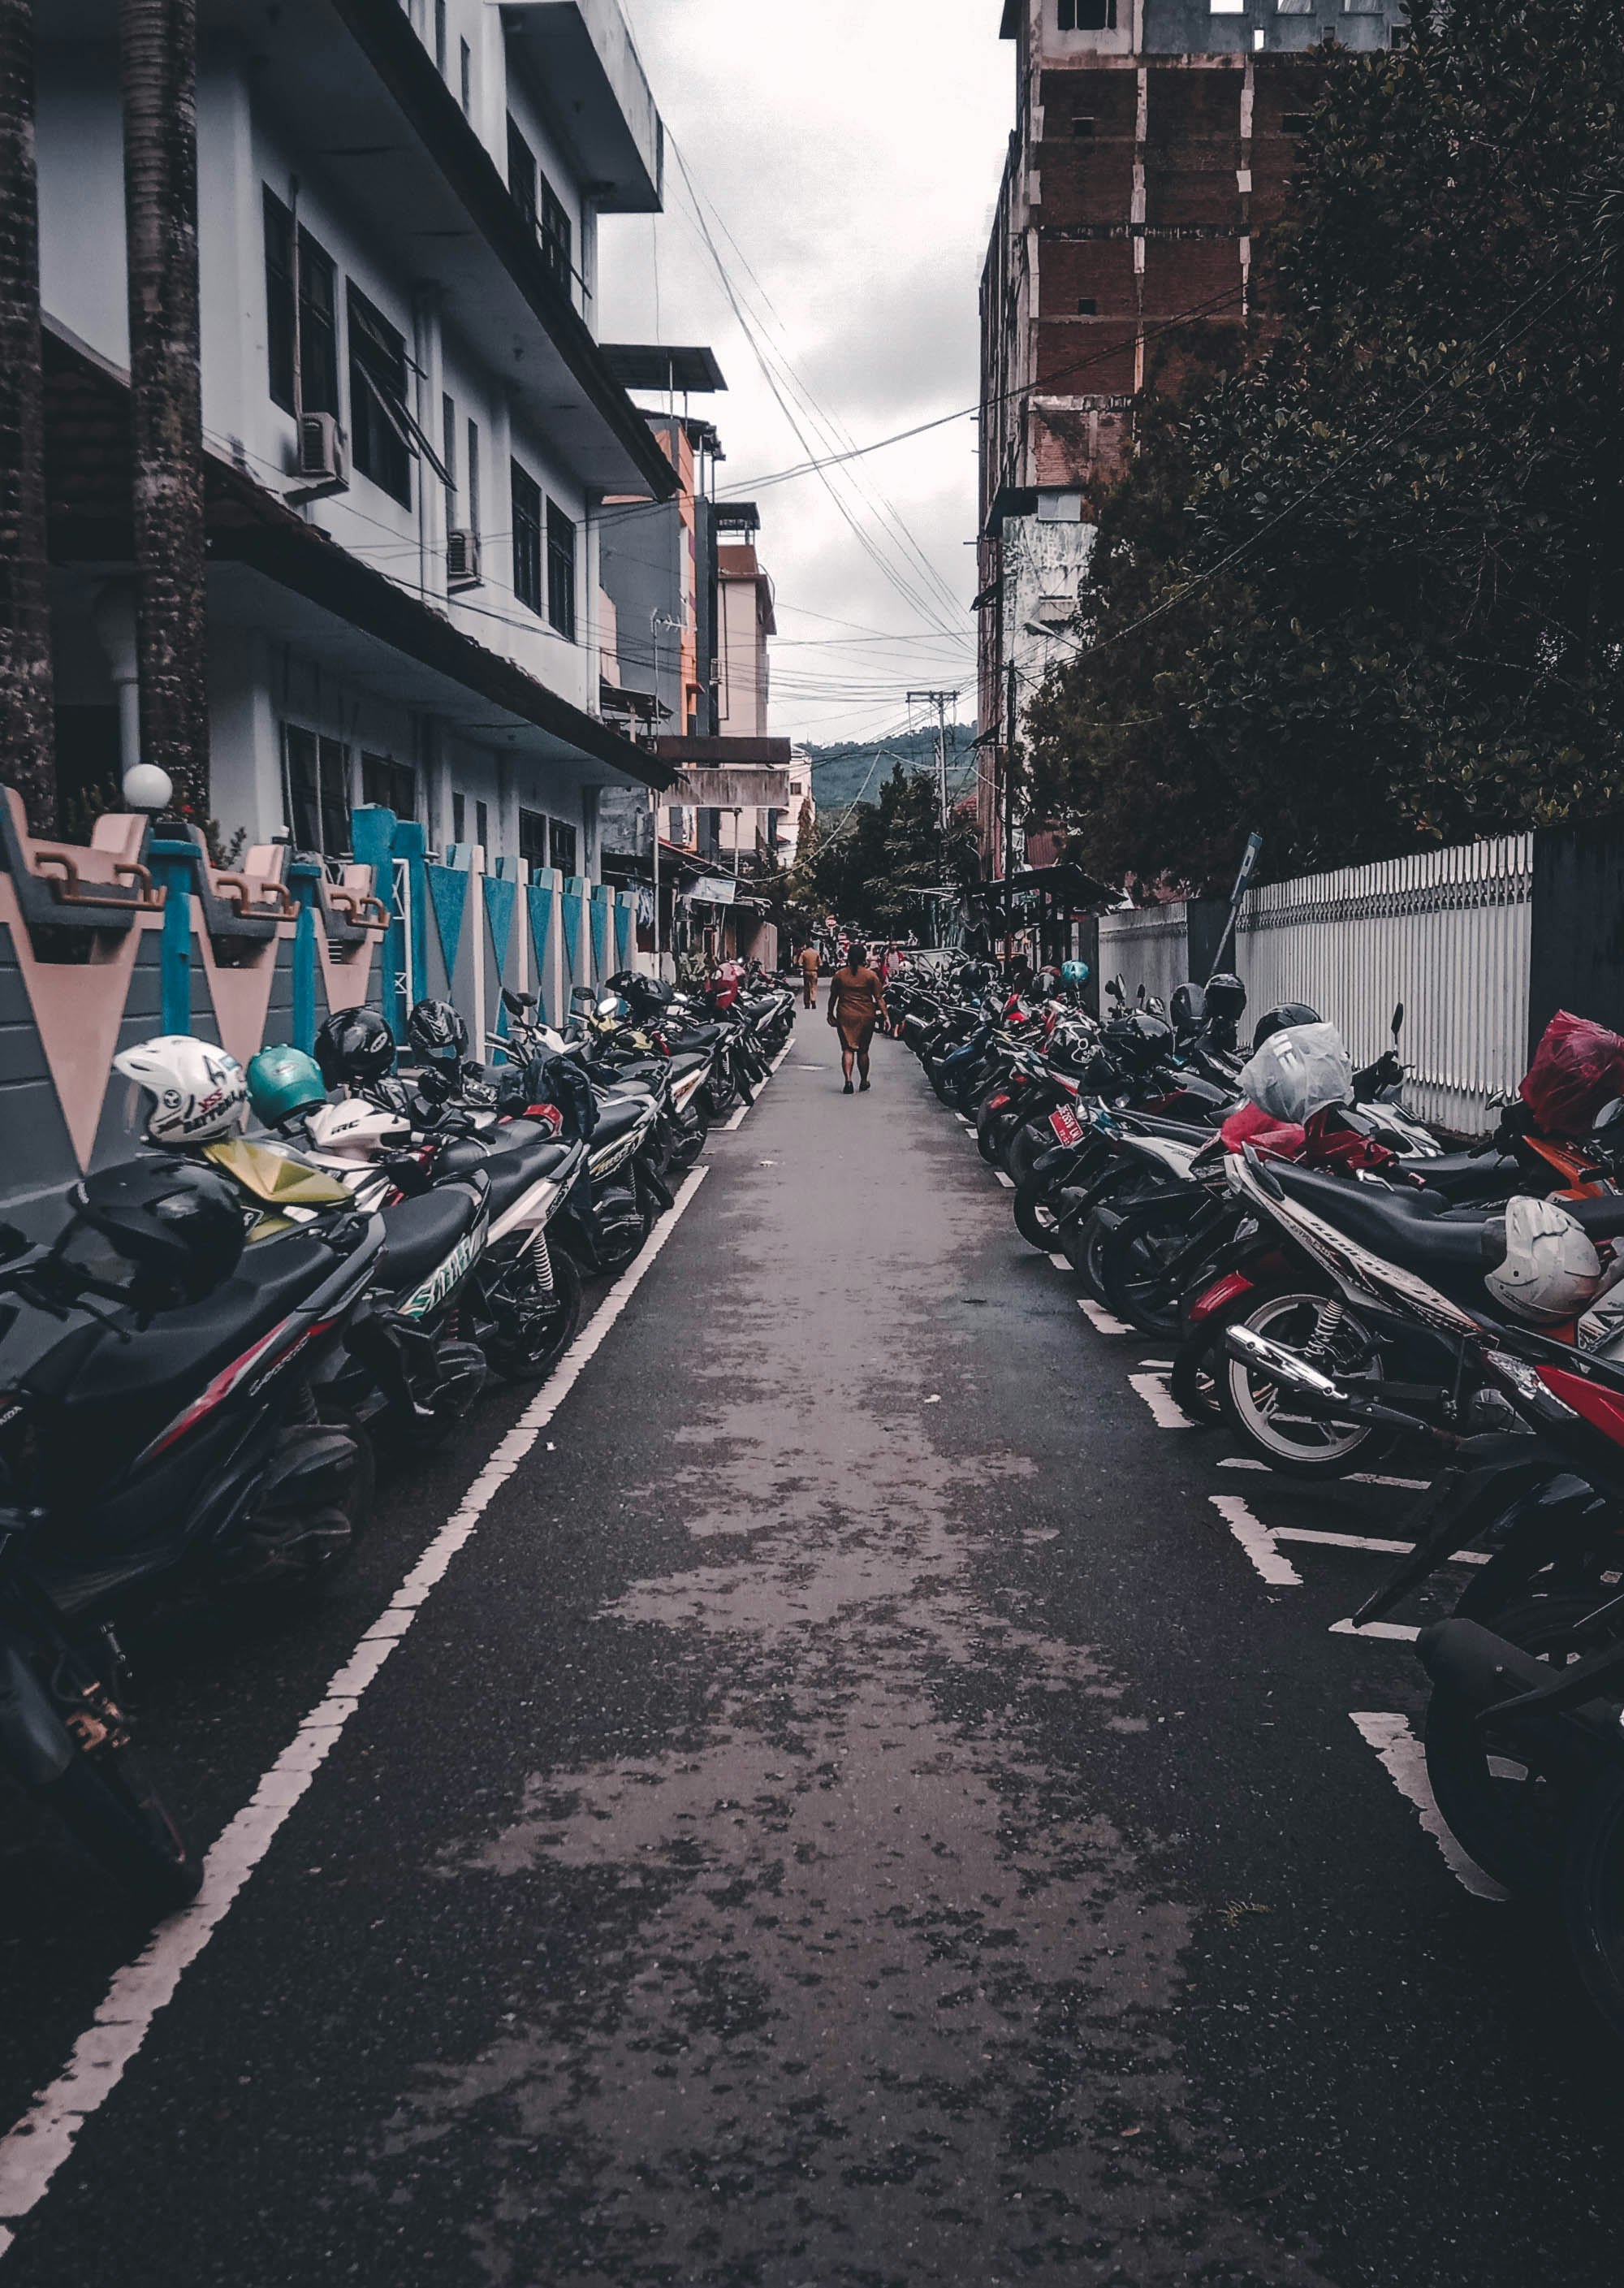 motorcycles parked in both sides of alley